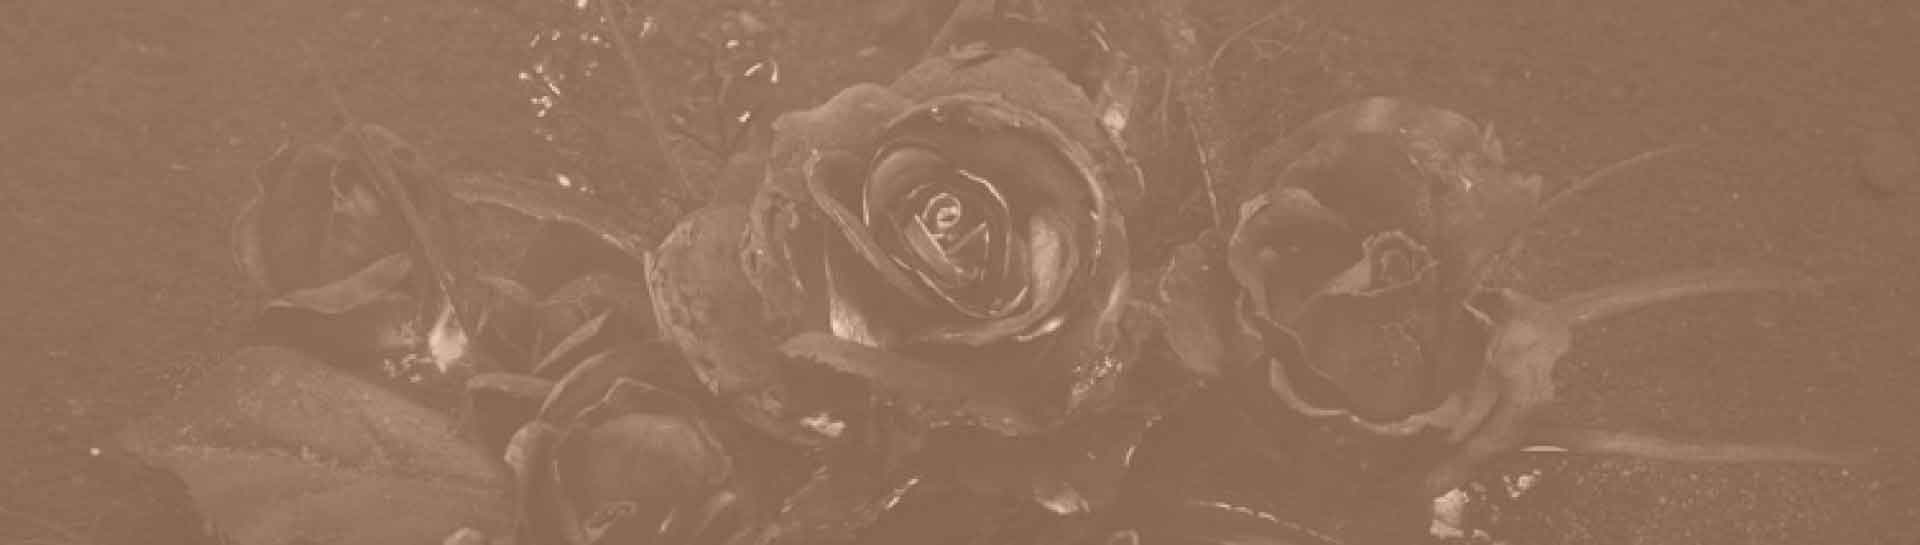 featured image of geochemical phytoremediation technology showing burning roses and ash modified after an image of arsthanea.com